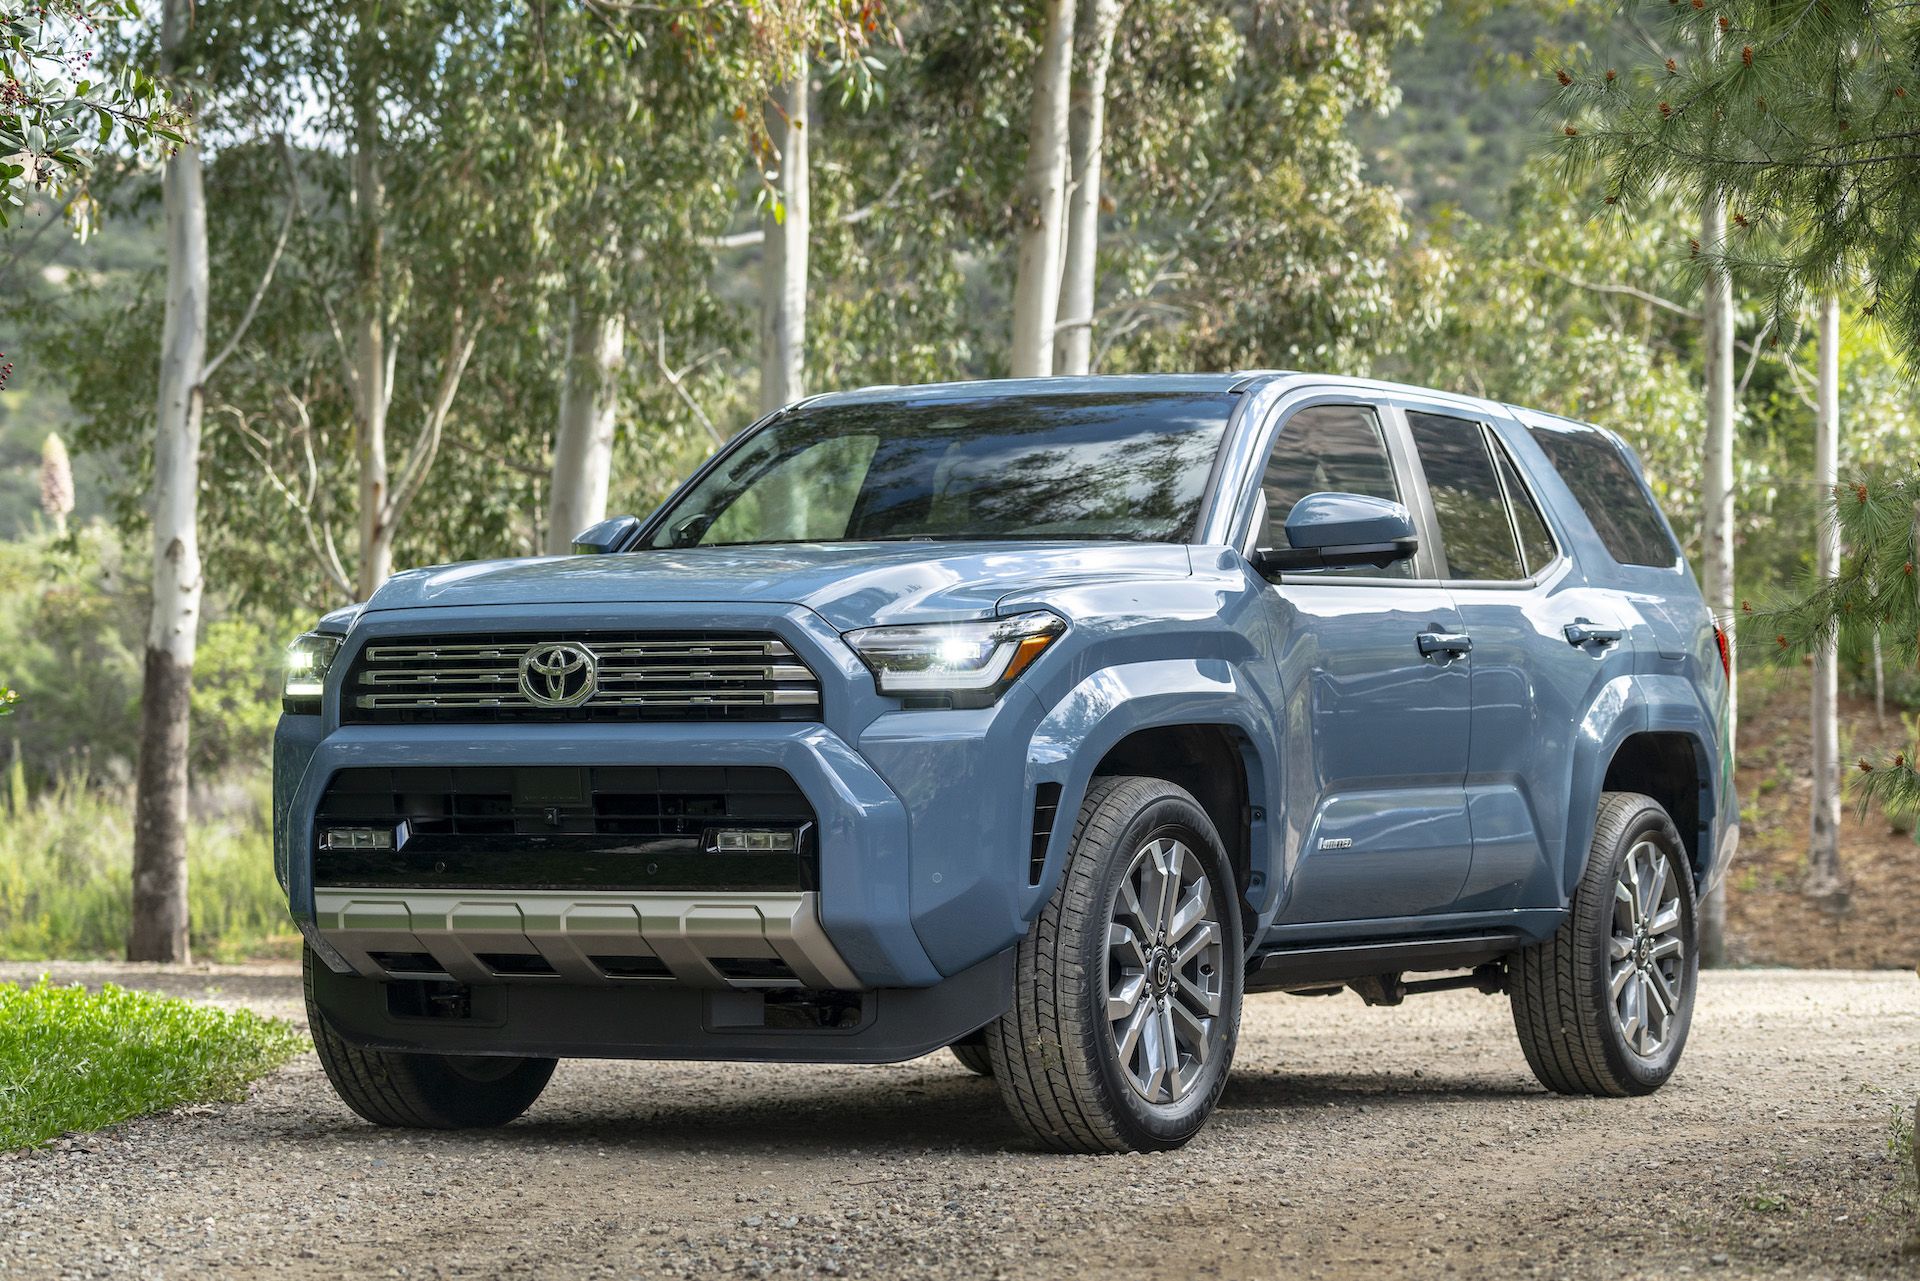 2025 Toyota 4runner Photos: 2025 4Runner LIMITED (Interior, Cargo Space, Exterior) in Heritage Blue color 2025-toyota-4runner-limited-112-jpg-6615620bc95af